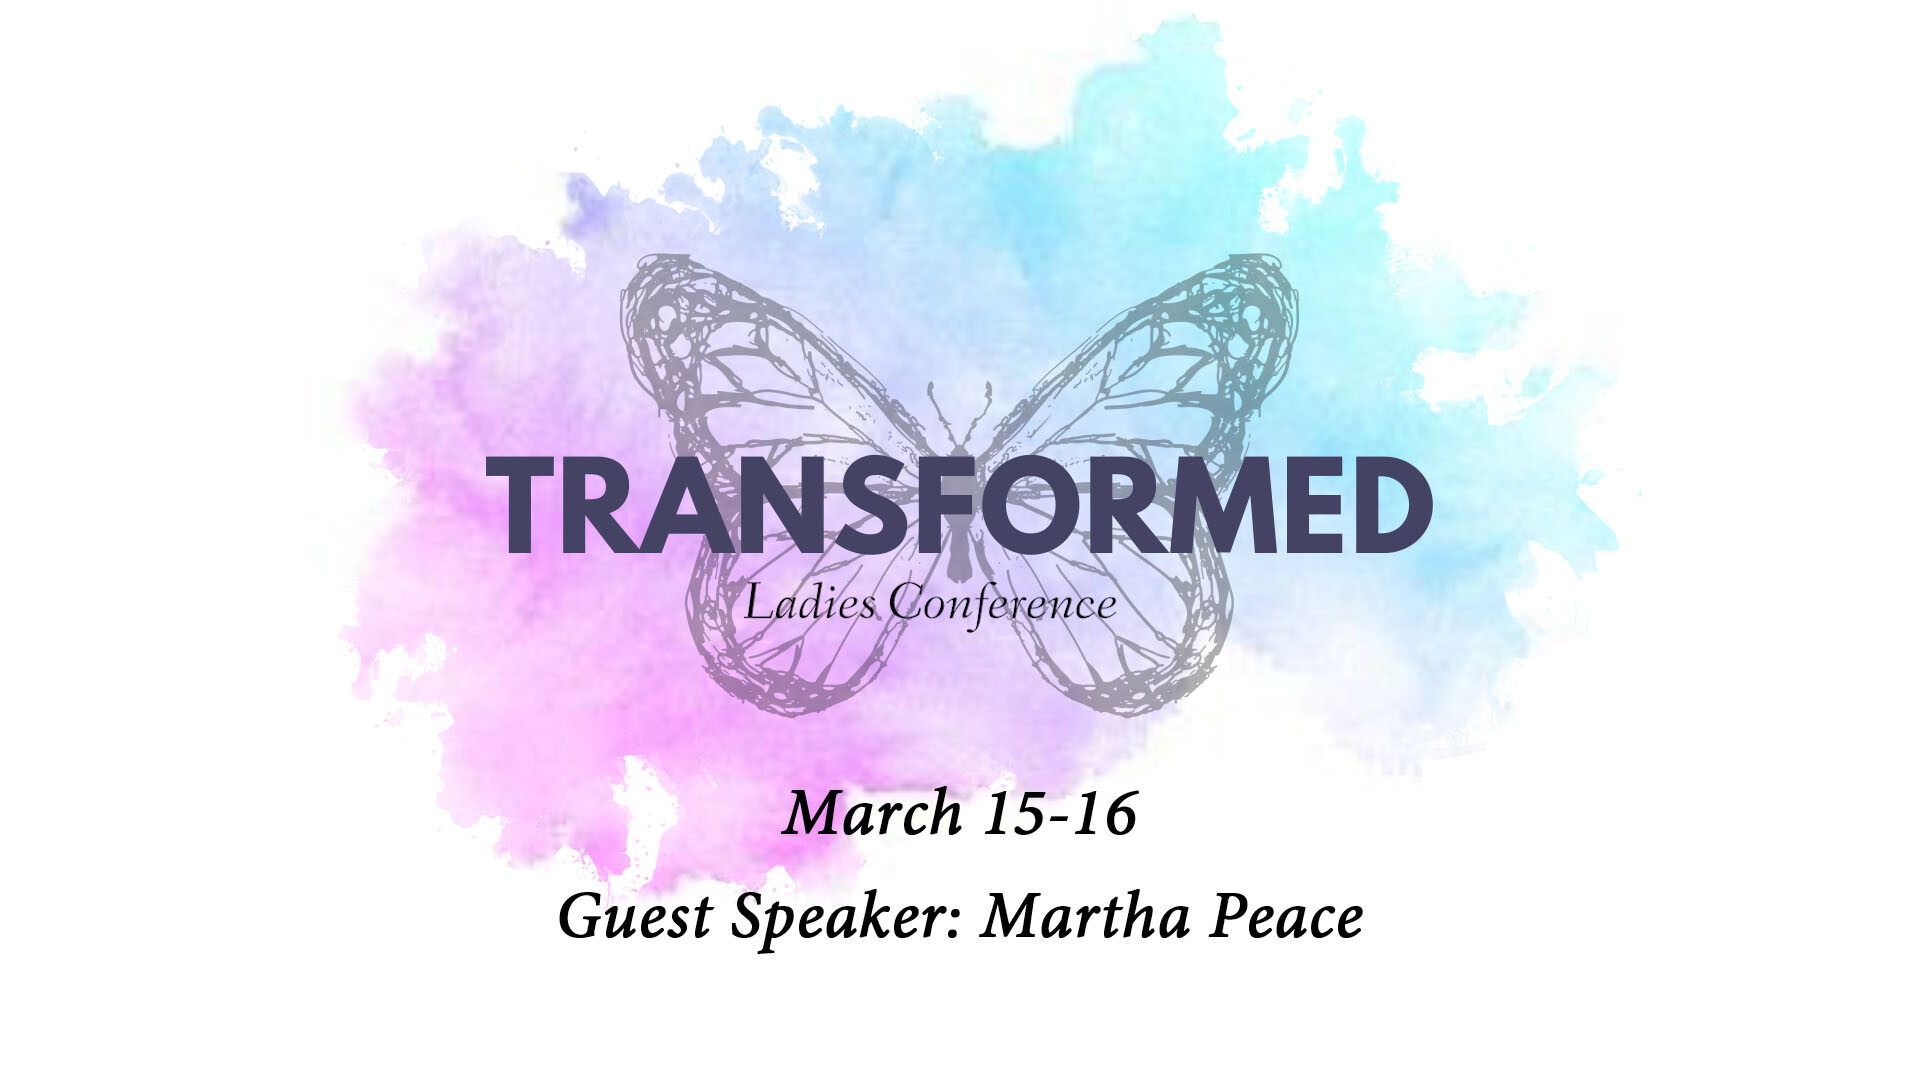 Session 2: Transformed Women's Conference